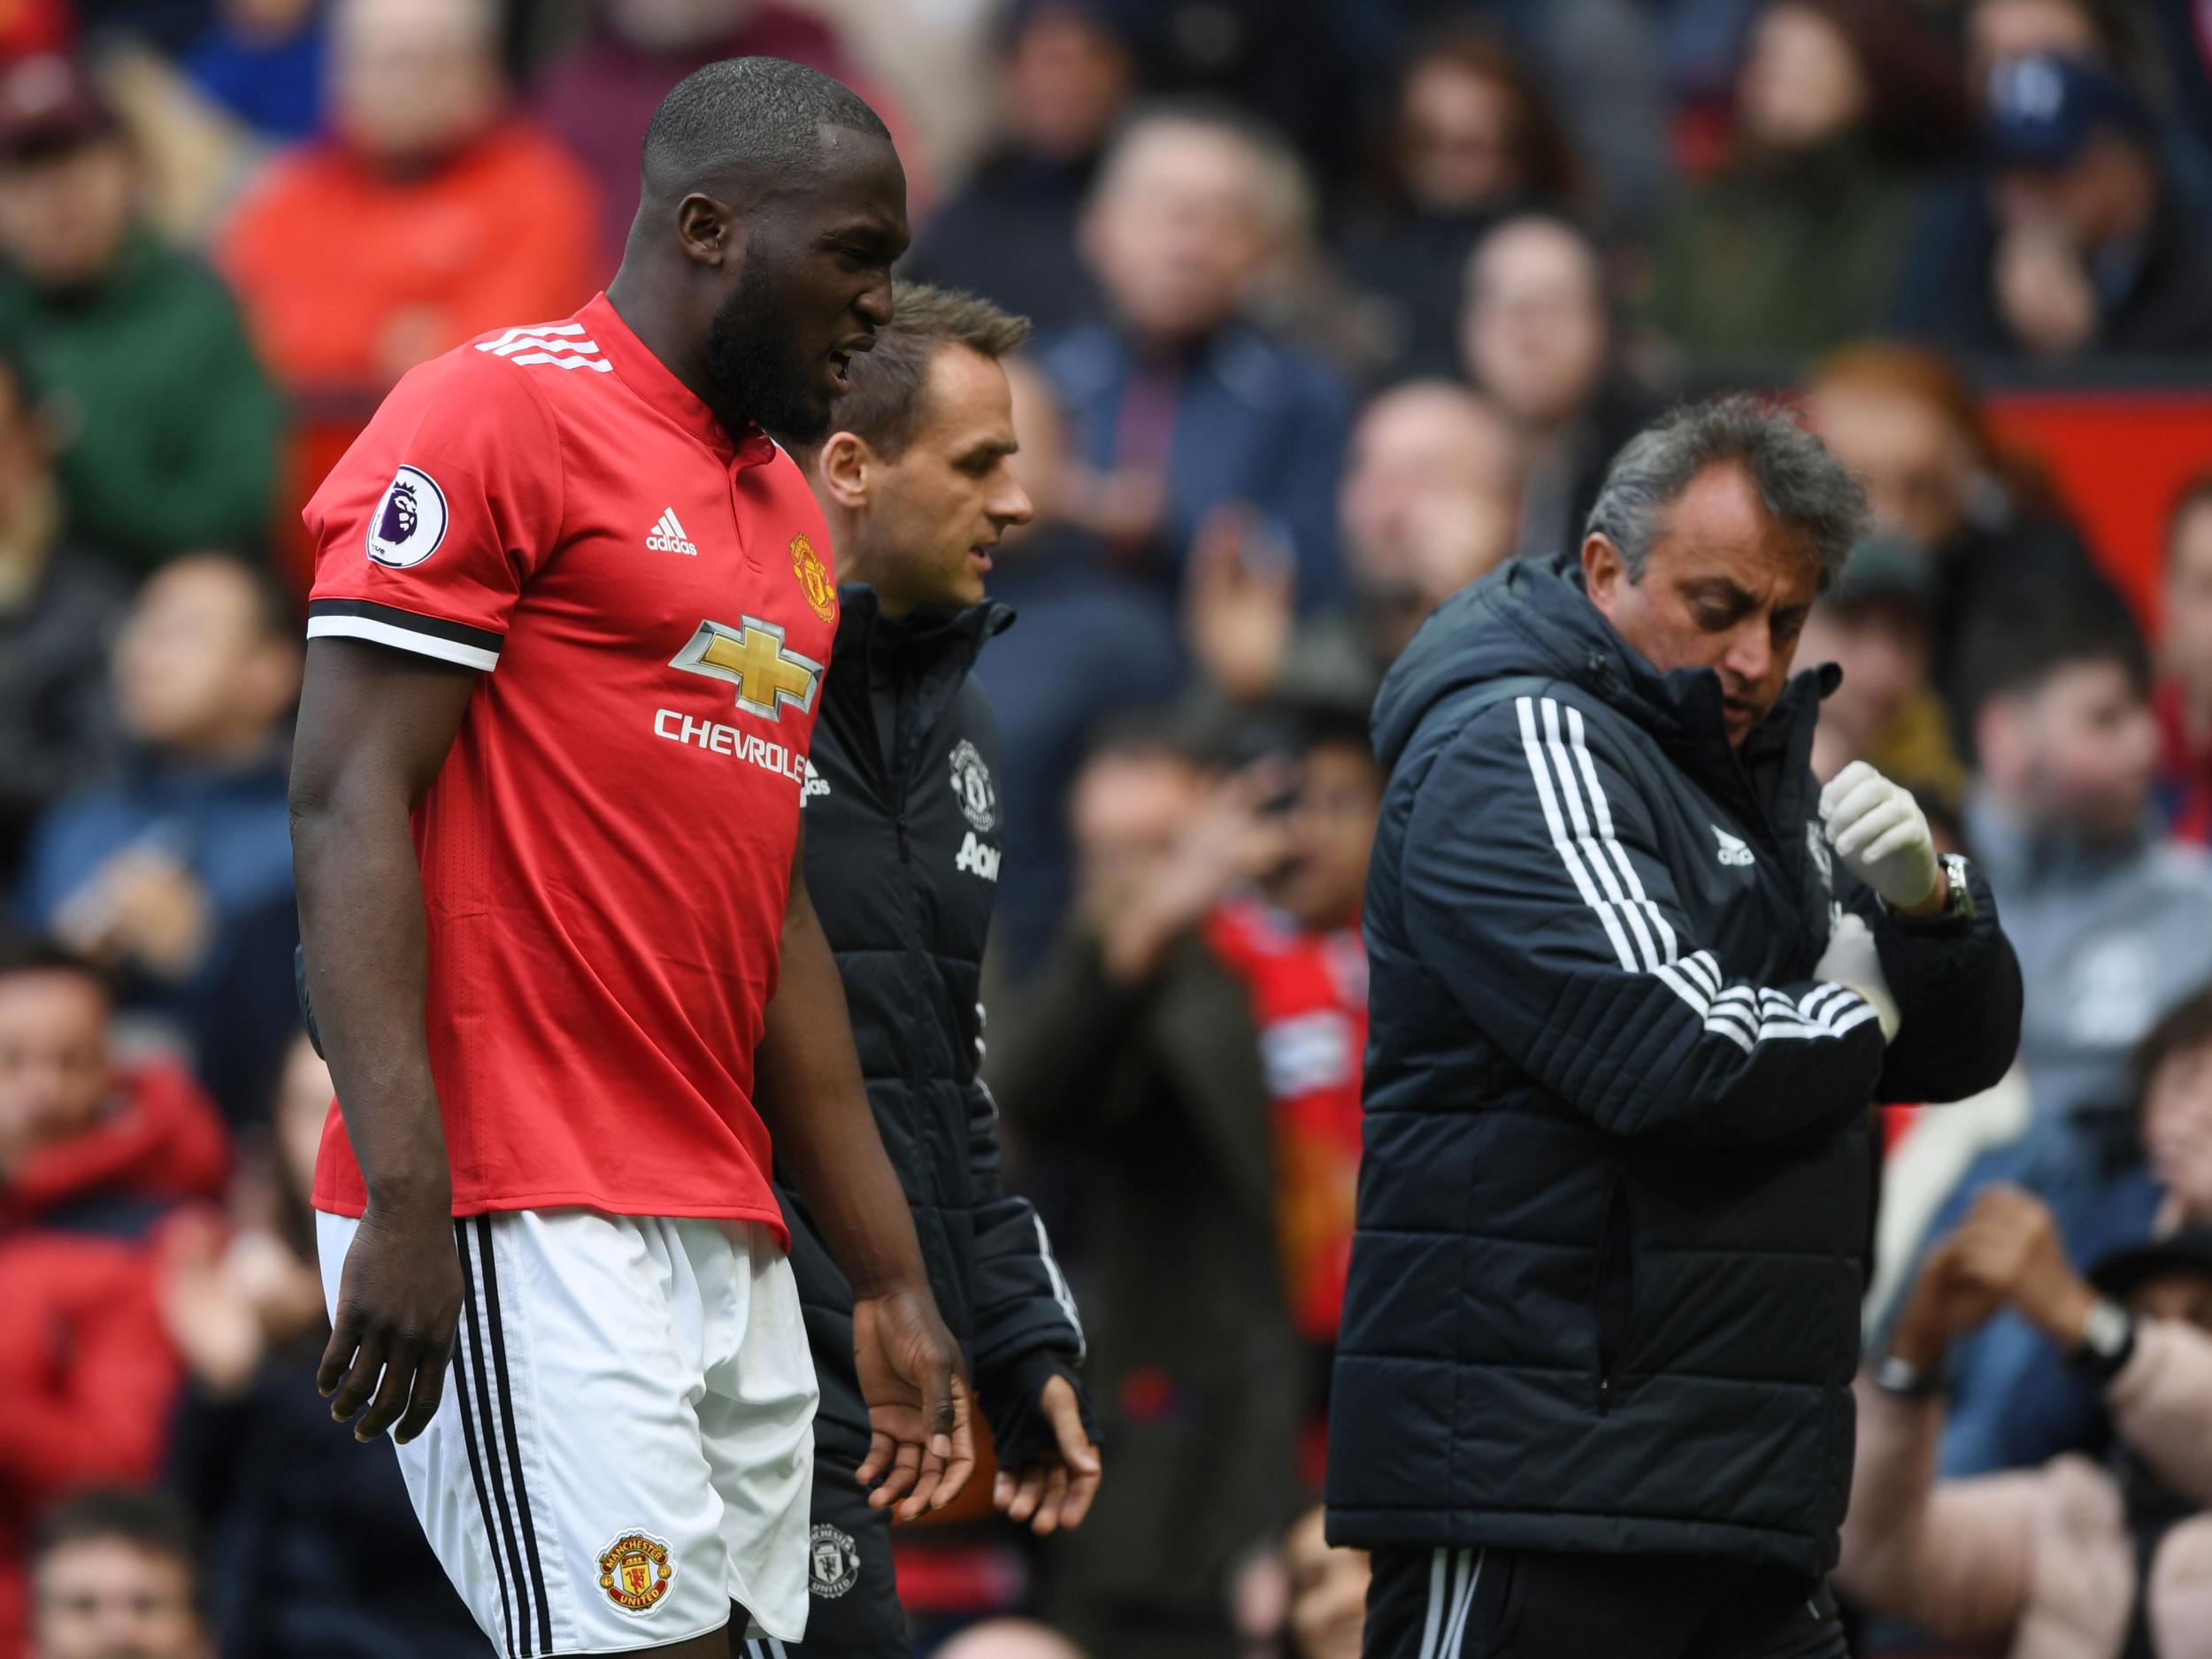 Romelu Lukaku was forced off with a foot injury against Arsenal